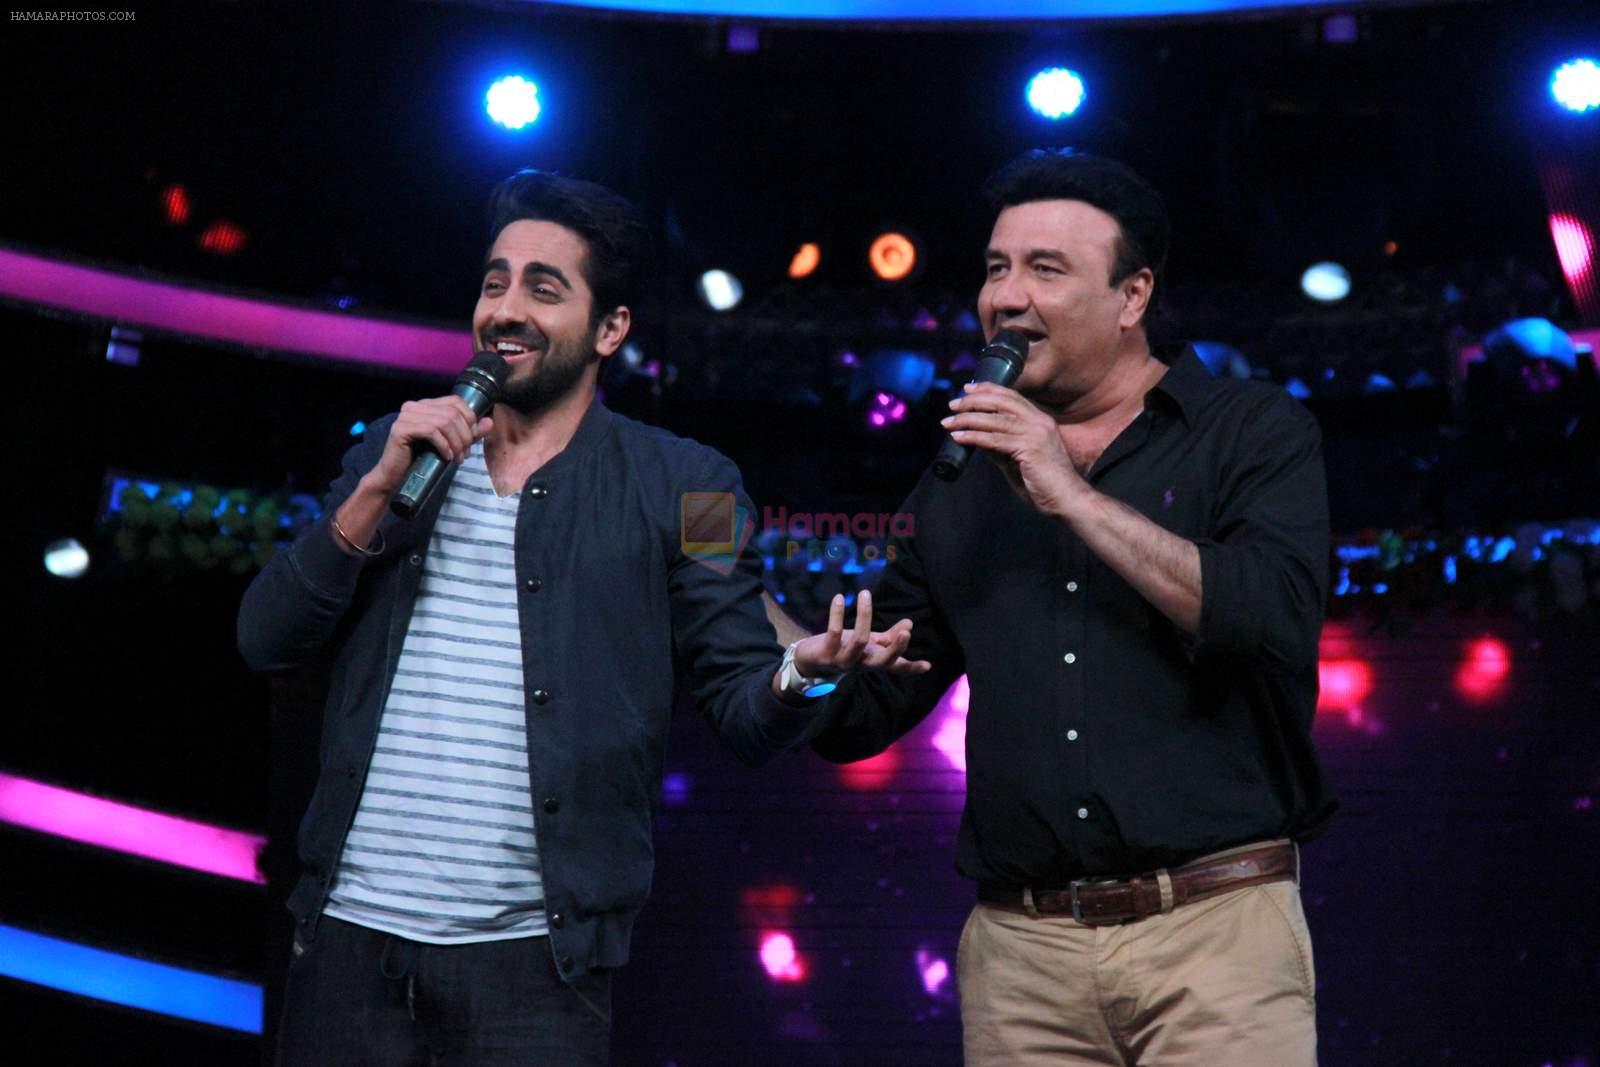 Ayushmann Khurrana, Anu Malik on the sets of Lil Champs in Famous on 24th Feb 2015